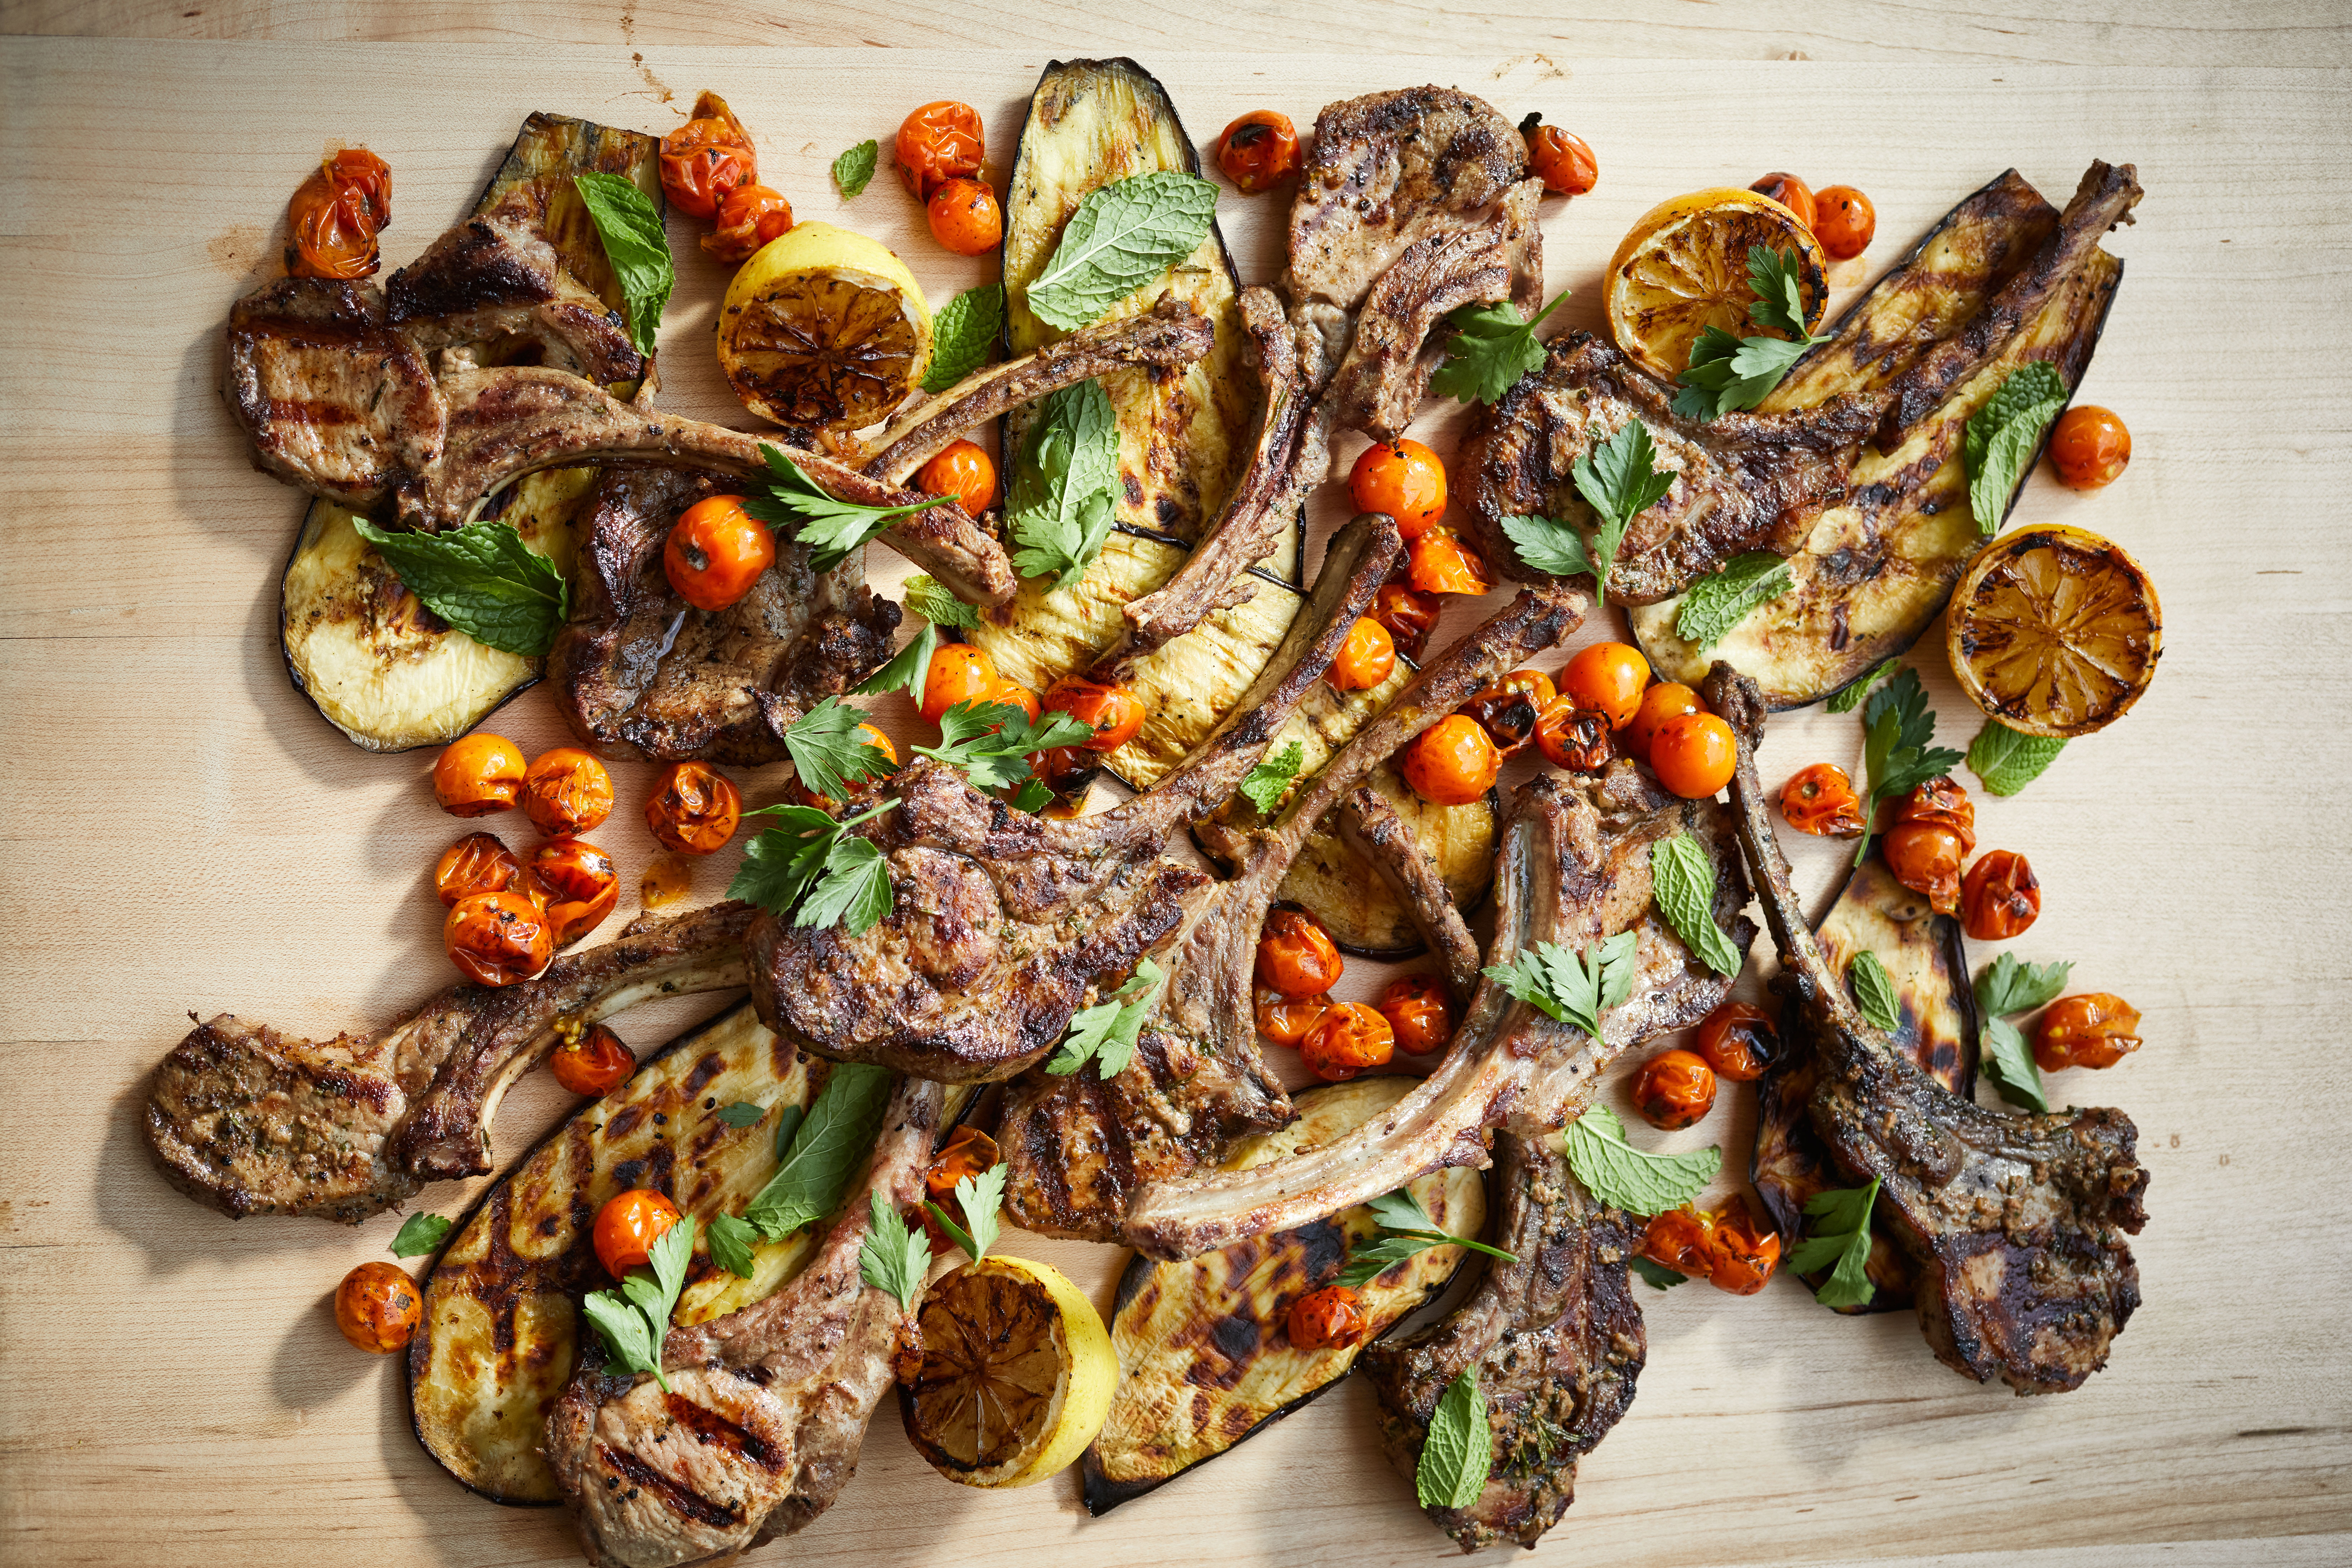 Several bone-in hog chops spread out on a light beige surface with long slices of roasted eggplant, roasted tomatoes, halved roasted lemons, leafy green herbs